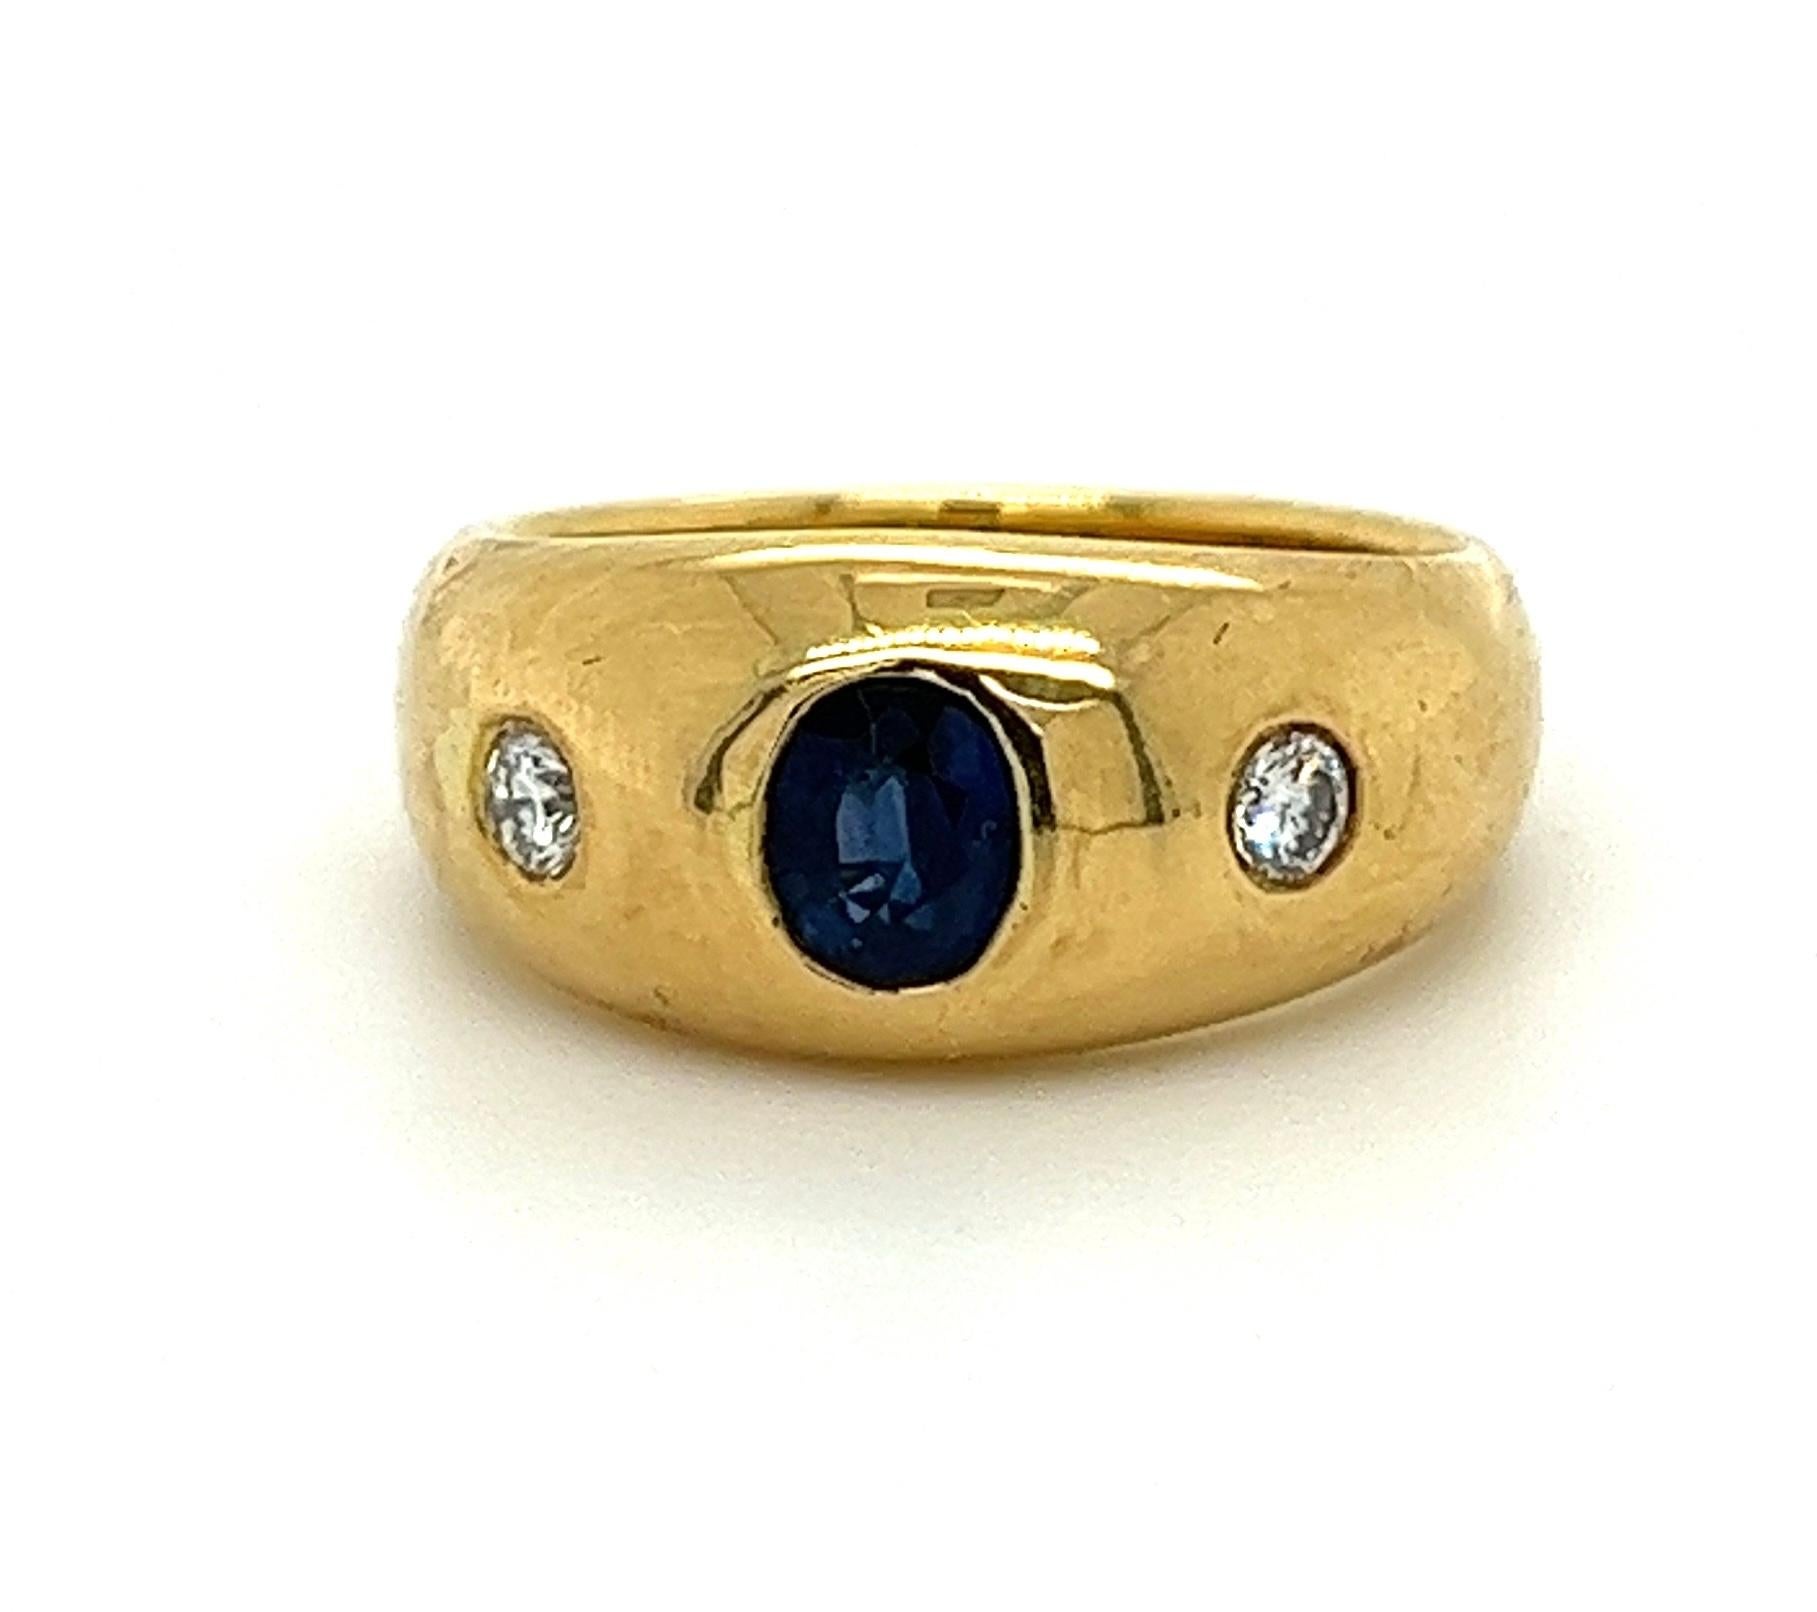 18K Yellow Gold Ring with Diamonds and Sapphire

1 Sapphire - 0.66 CT
2 Diamonds - 0.18 CT

Introducing our exquisite 18K gold ring, featuring a minimalist design. Embellished with high-quality deep blue sapphires and sparkling diamonds, this ring